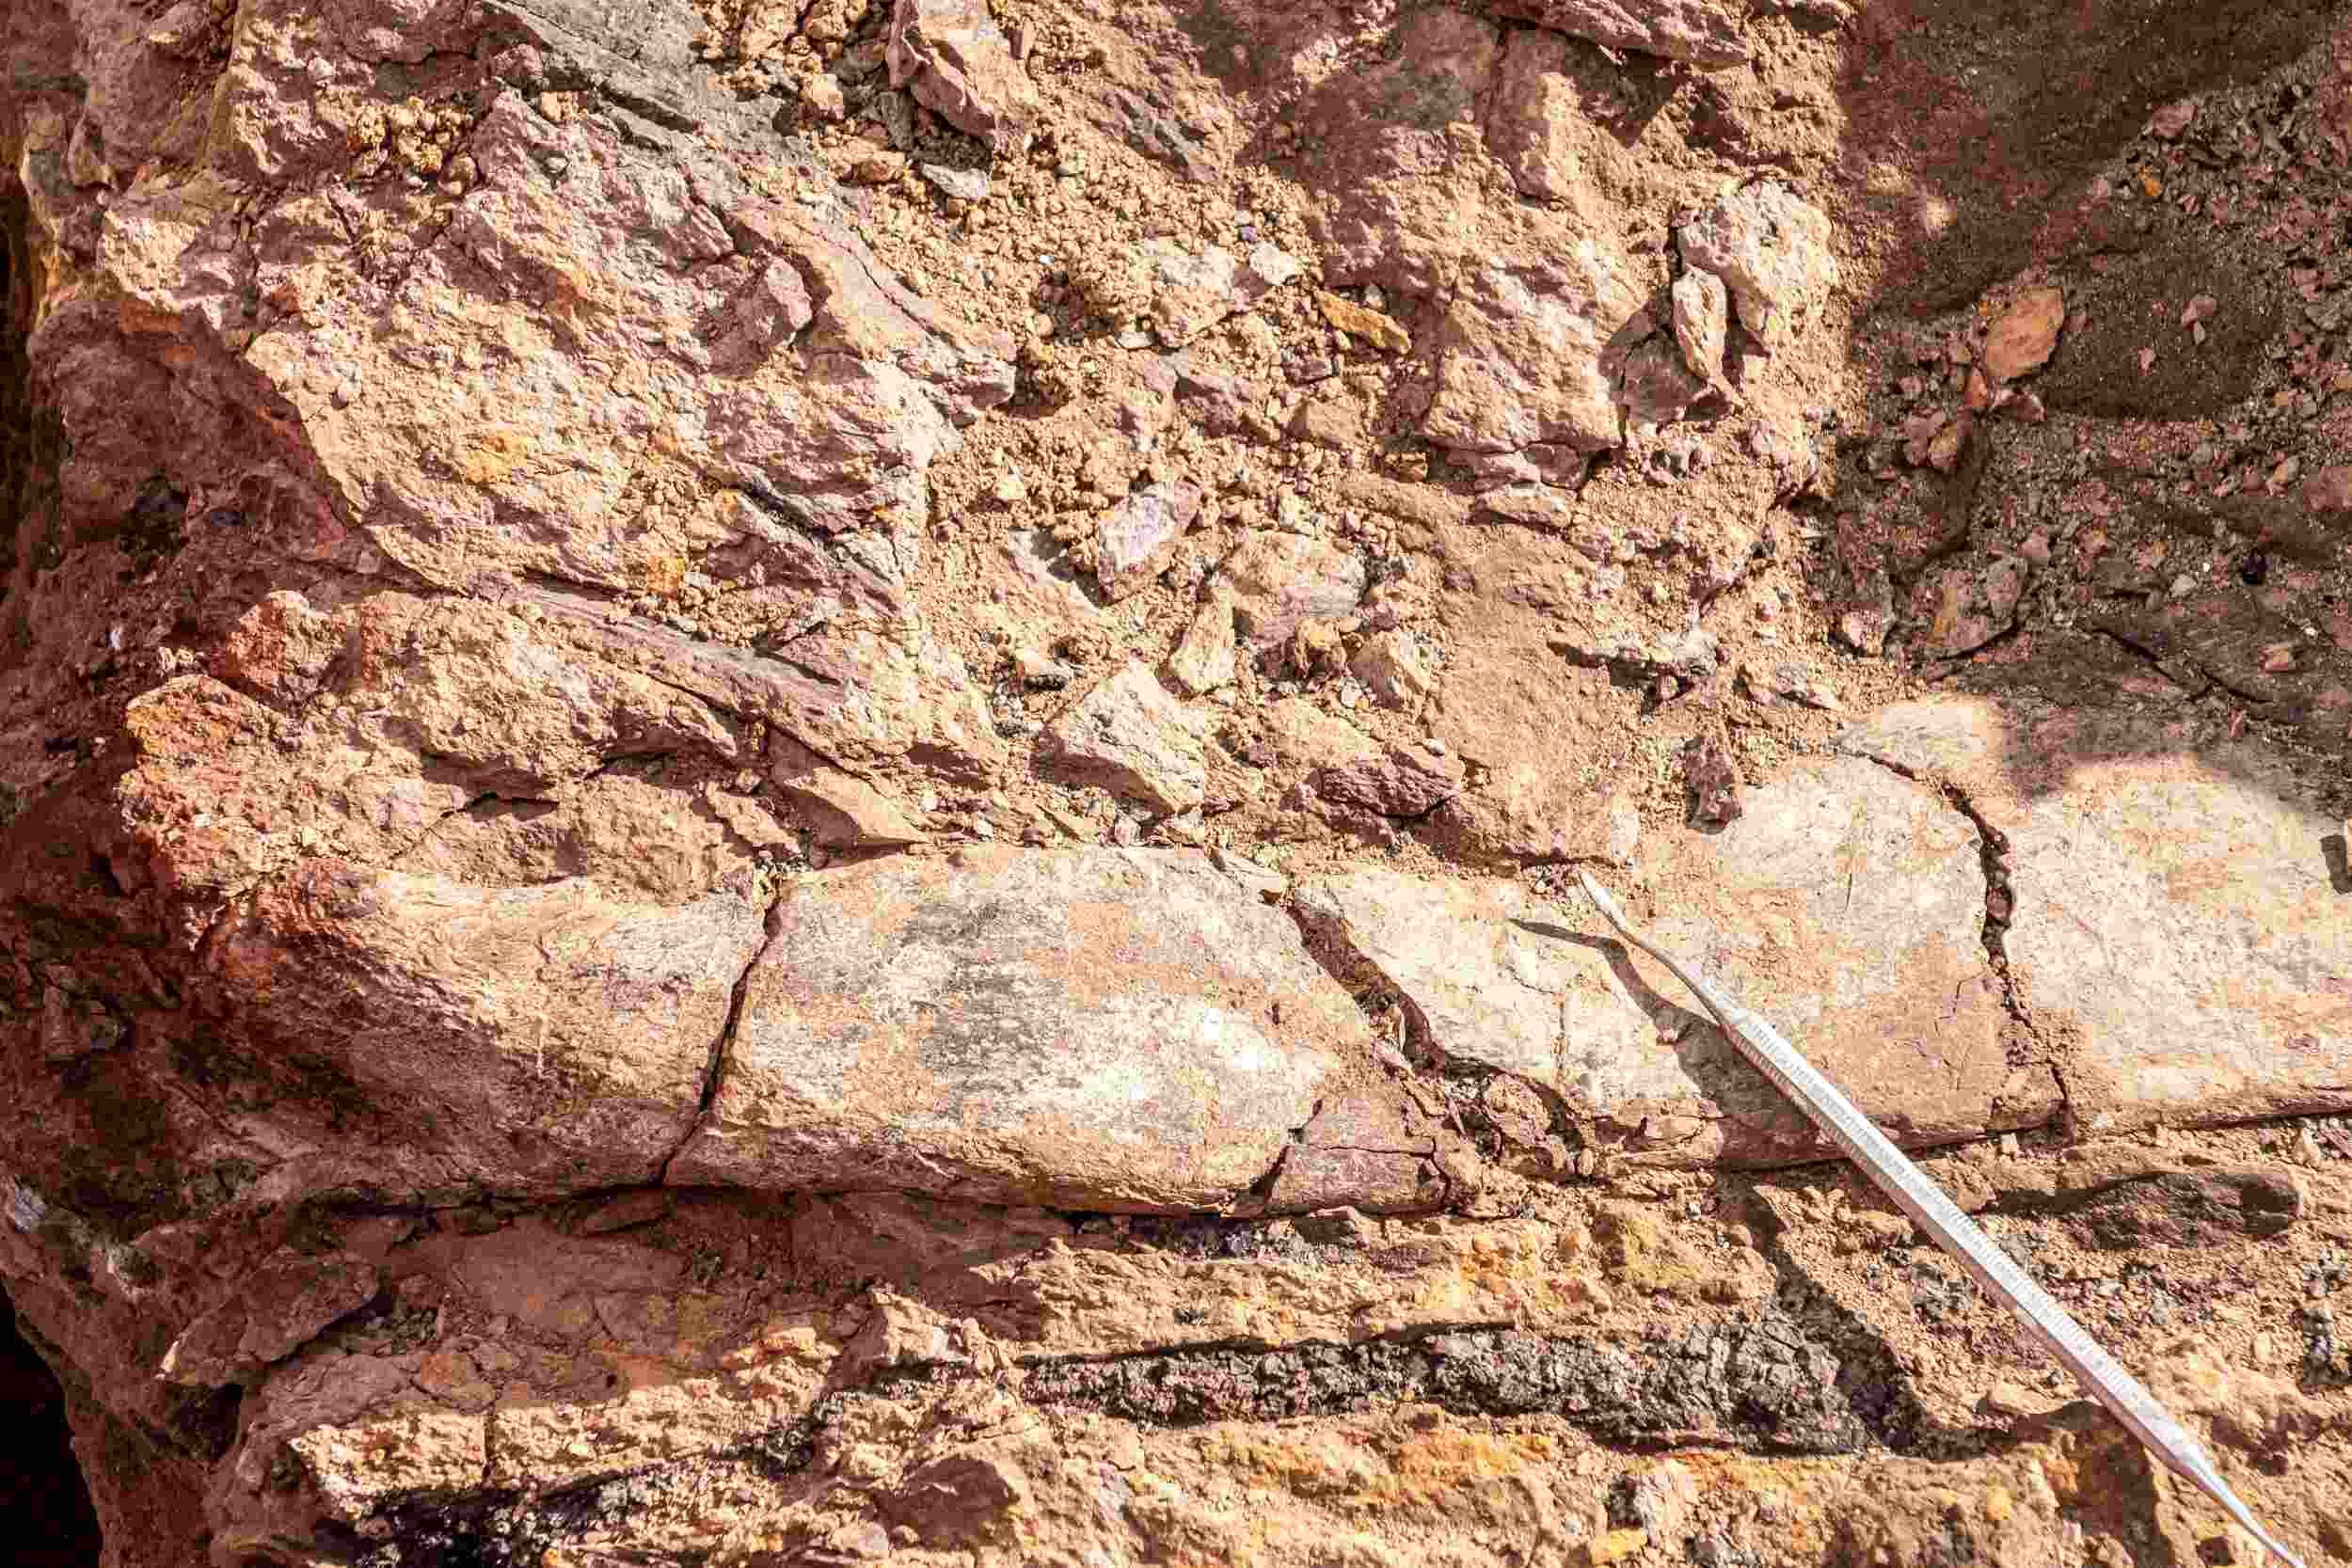 Scientists unearth megaraptors, feathered dinosaur fossils in Chile’s Patagonia